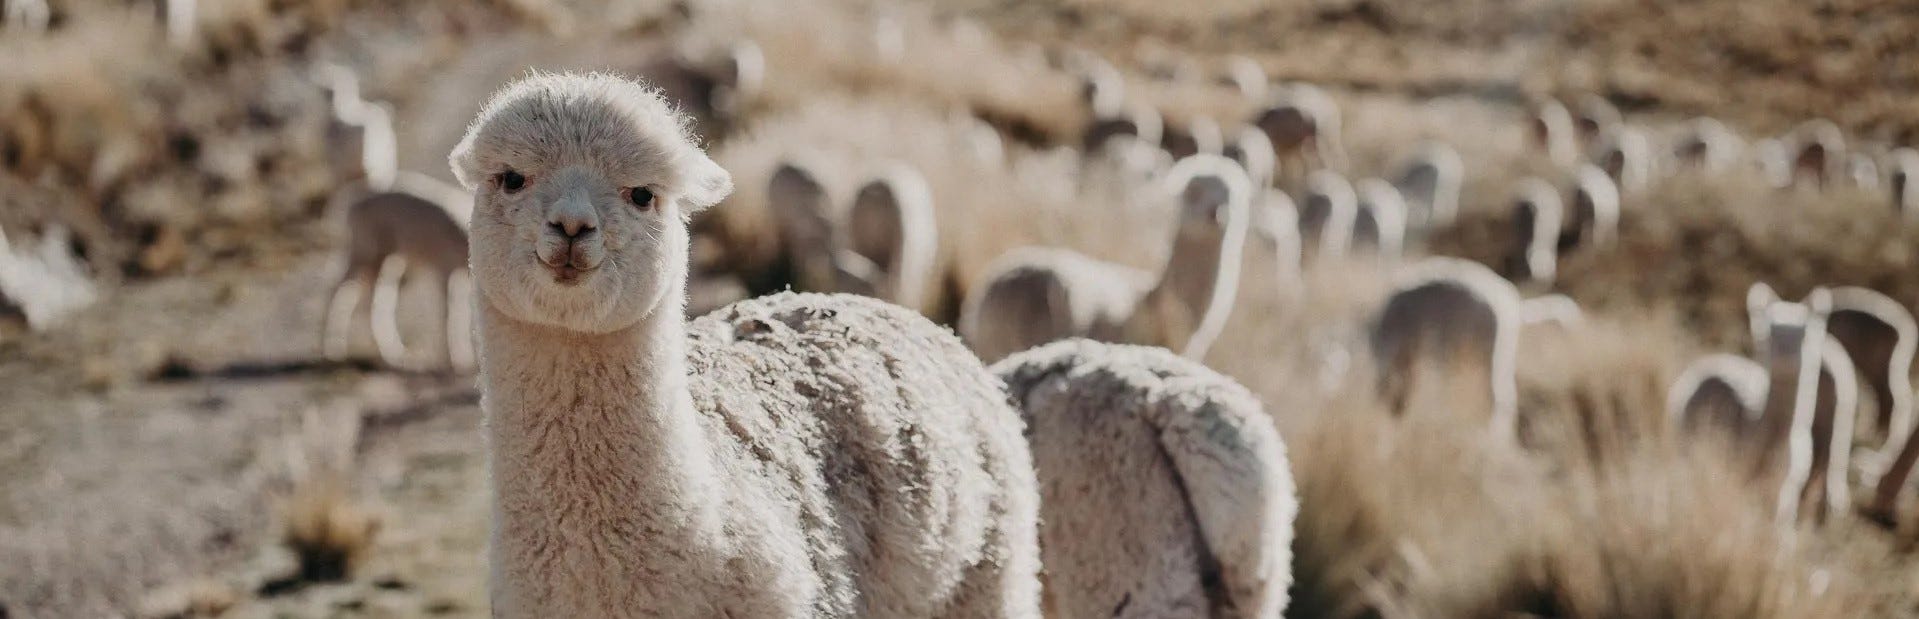 Merino Wool vs Alpaca Wool | What is the difference? Which one is better?